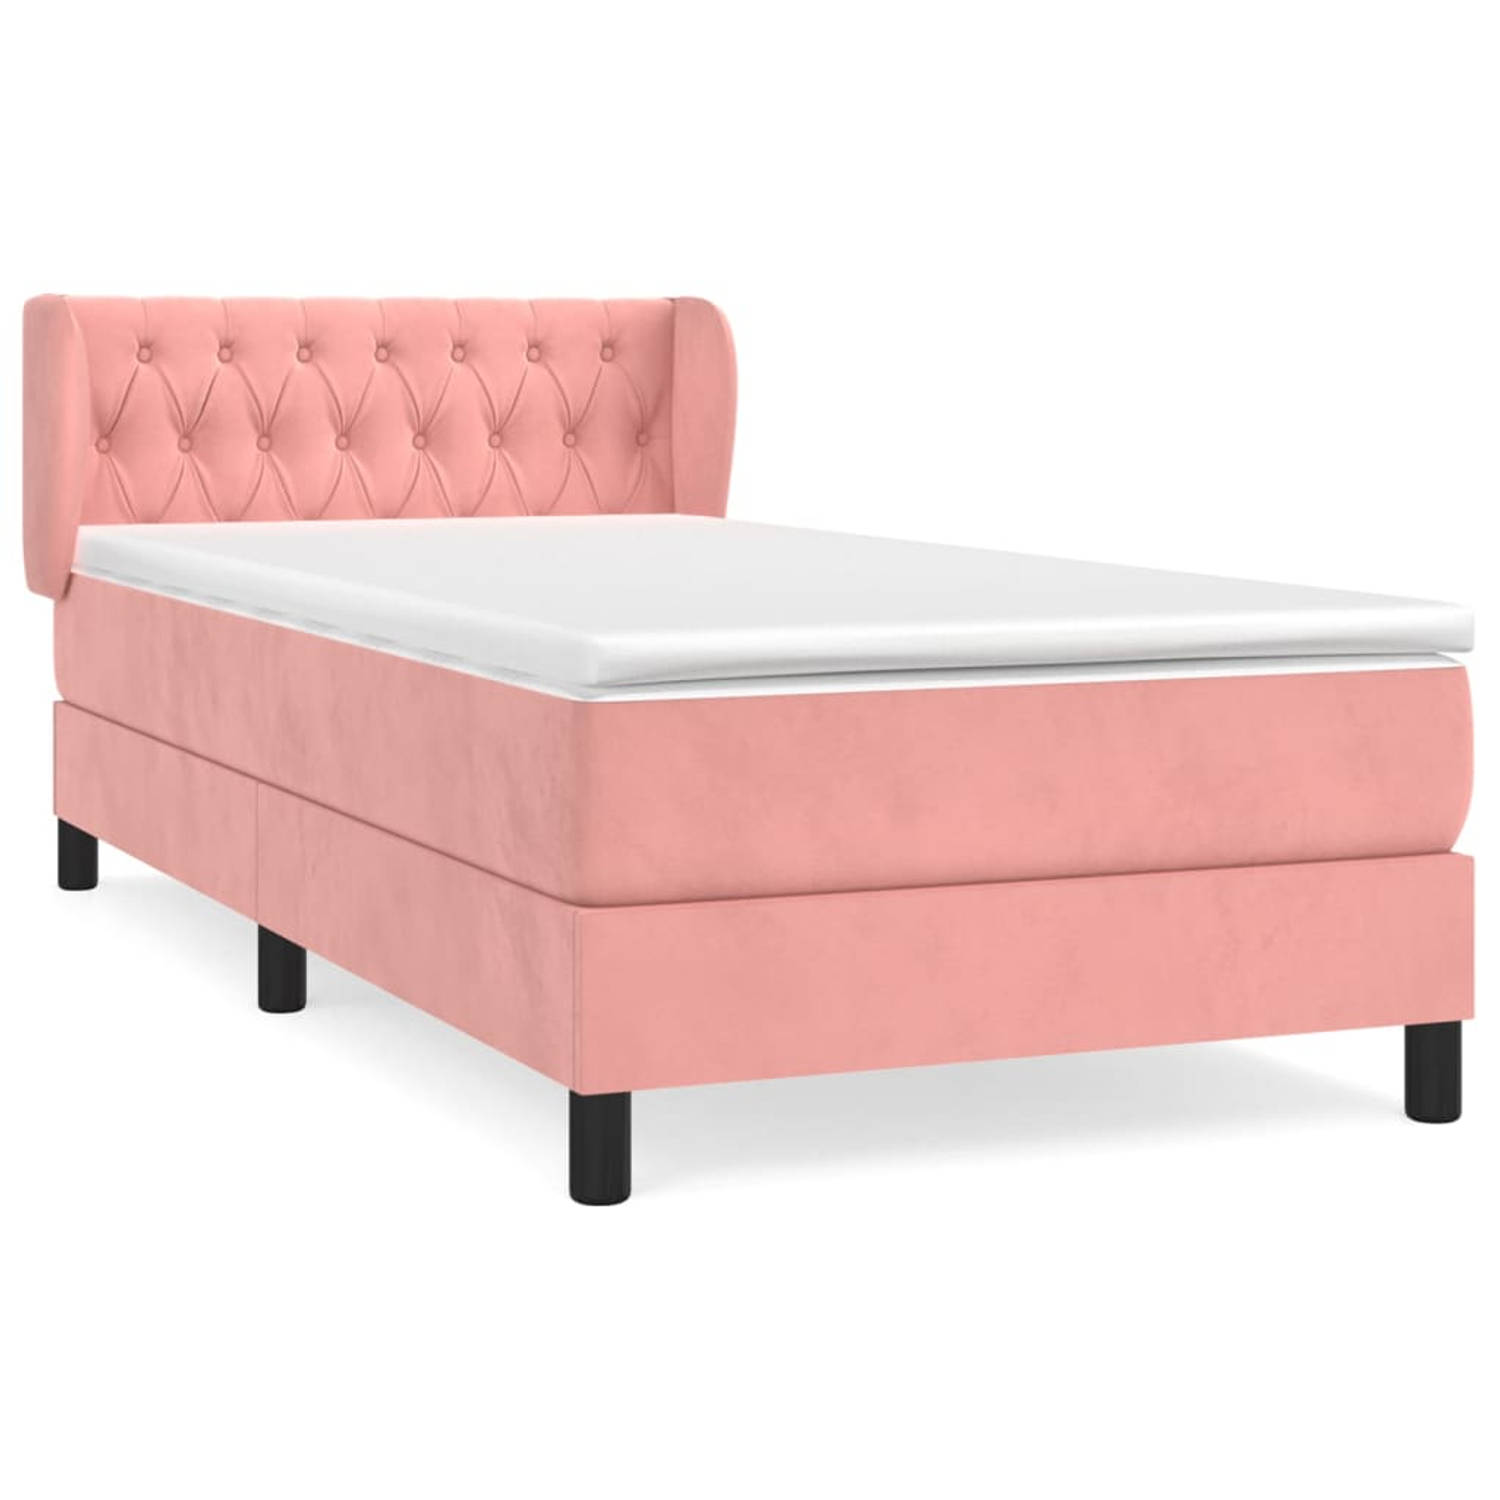 The Living Store Vouwbed - Boxspring - 90x200 cm - Fluweel roze - Pocketvering